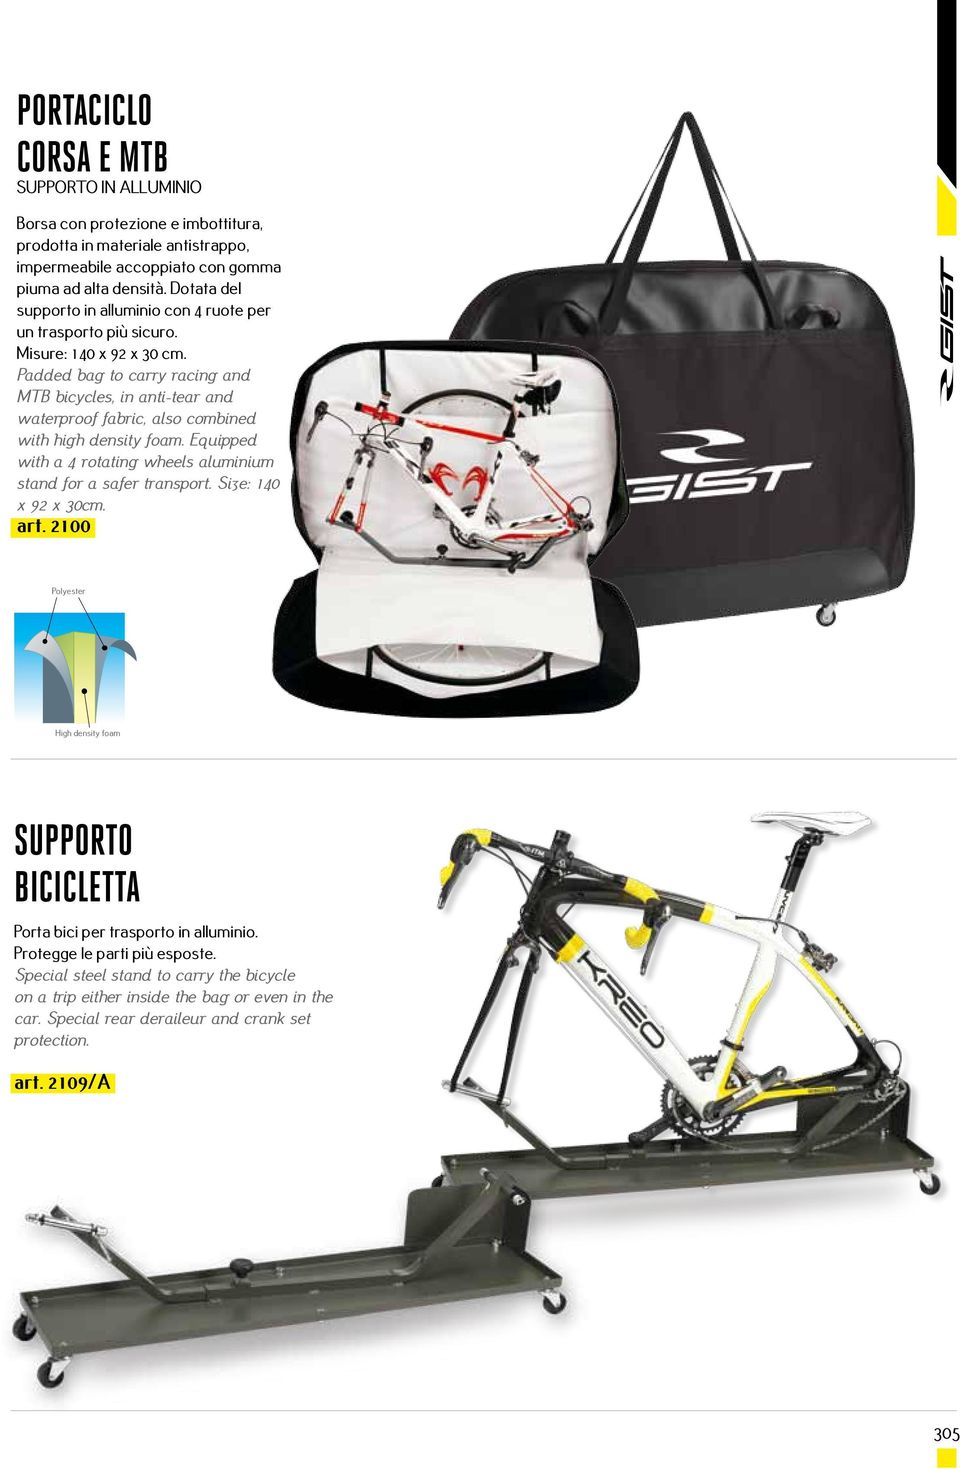 Padded bag to carry racing and MTB bicycles, in anti-tear and waterproof fabric, also combined with high density foam. Equipped with a 4 rotating wheels aluminium stand for a safer transport.